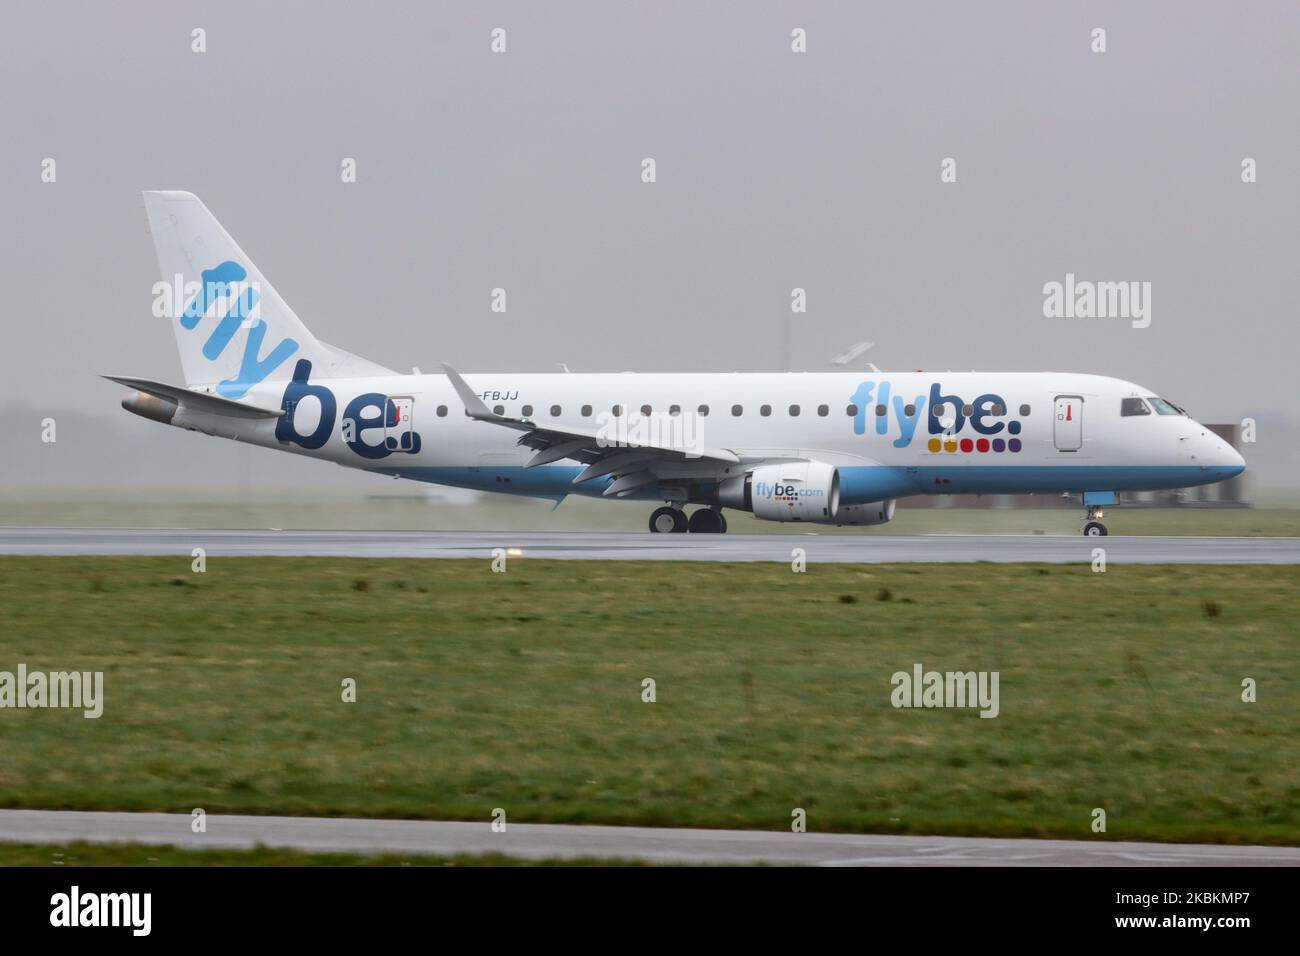 Flybe Embraer ERJ-175 aircraft as seen landing and taxiing at Amsterdam Schiphol International Airport. The Brazilian made airplane has the registration G-FBJJ. Flybe was a British commercial airline carrier with 63 planes fleet that ceased operations on March 5, 2020 because of financial problems and deterioration of passenger traffic because of Coronavirus Covid-19 pandemic. (Photo by Nicolas Economou/NurPhoto) Stock Photo